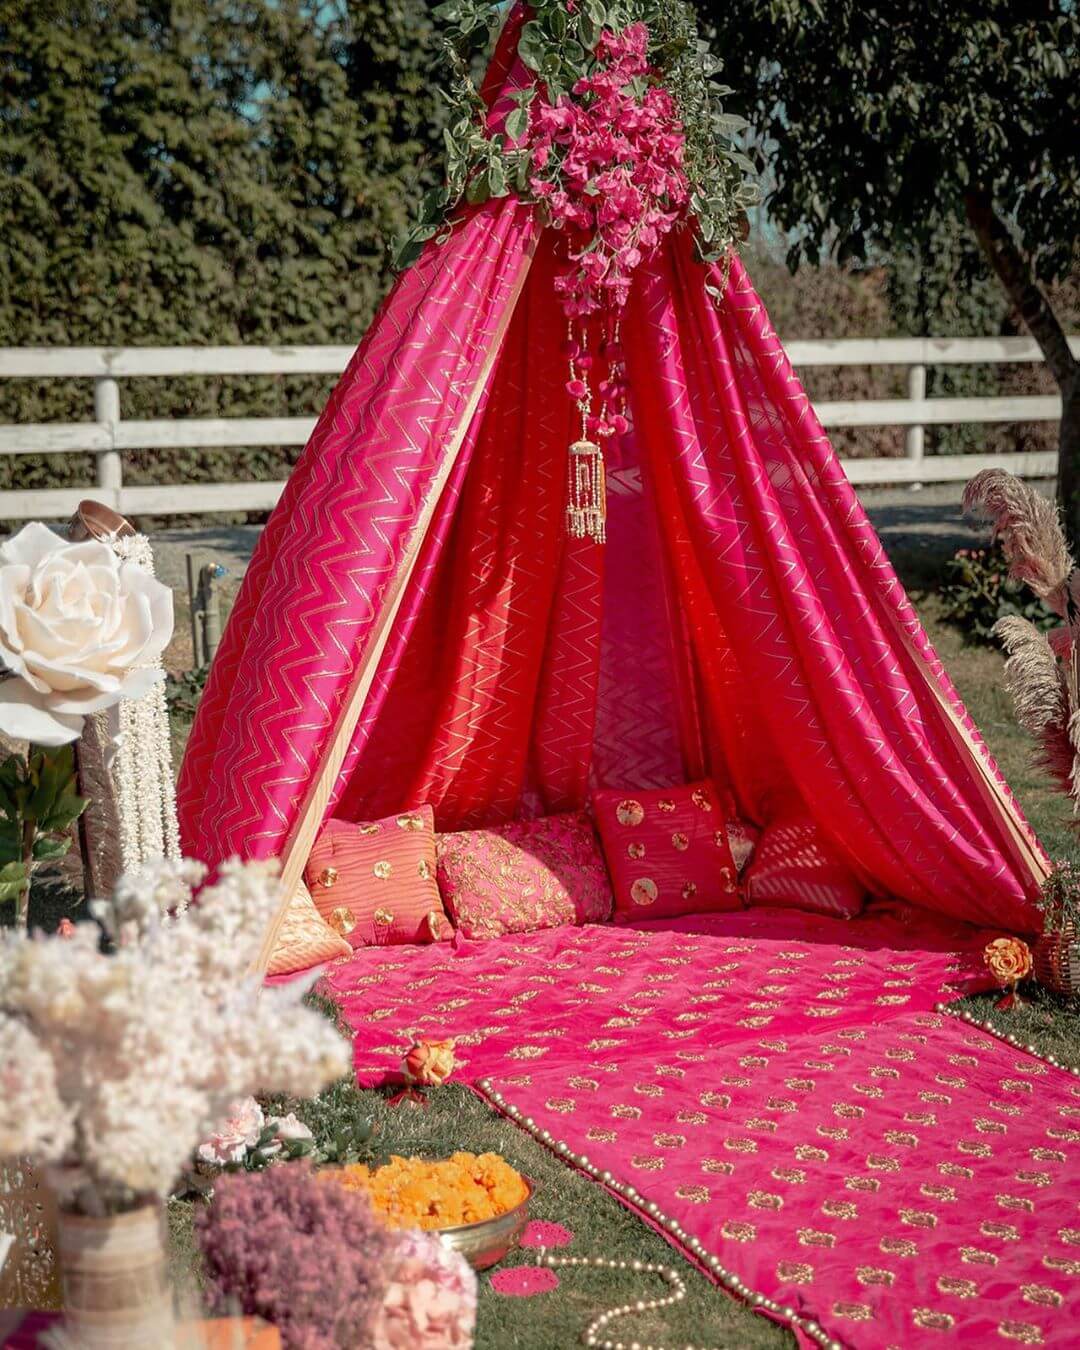 Bridal Bed to the Mehndi Swing - Bridal Seat Ideas from Rent Real Weddings  to spruce up your Mehndi Decor - Witty Vows